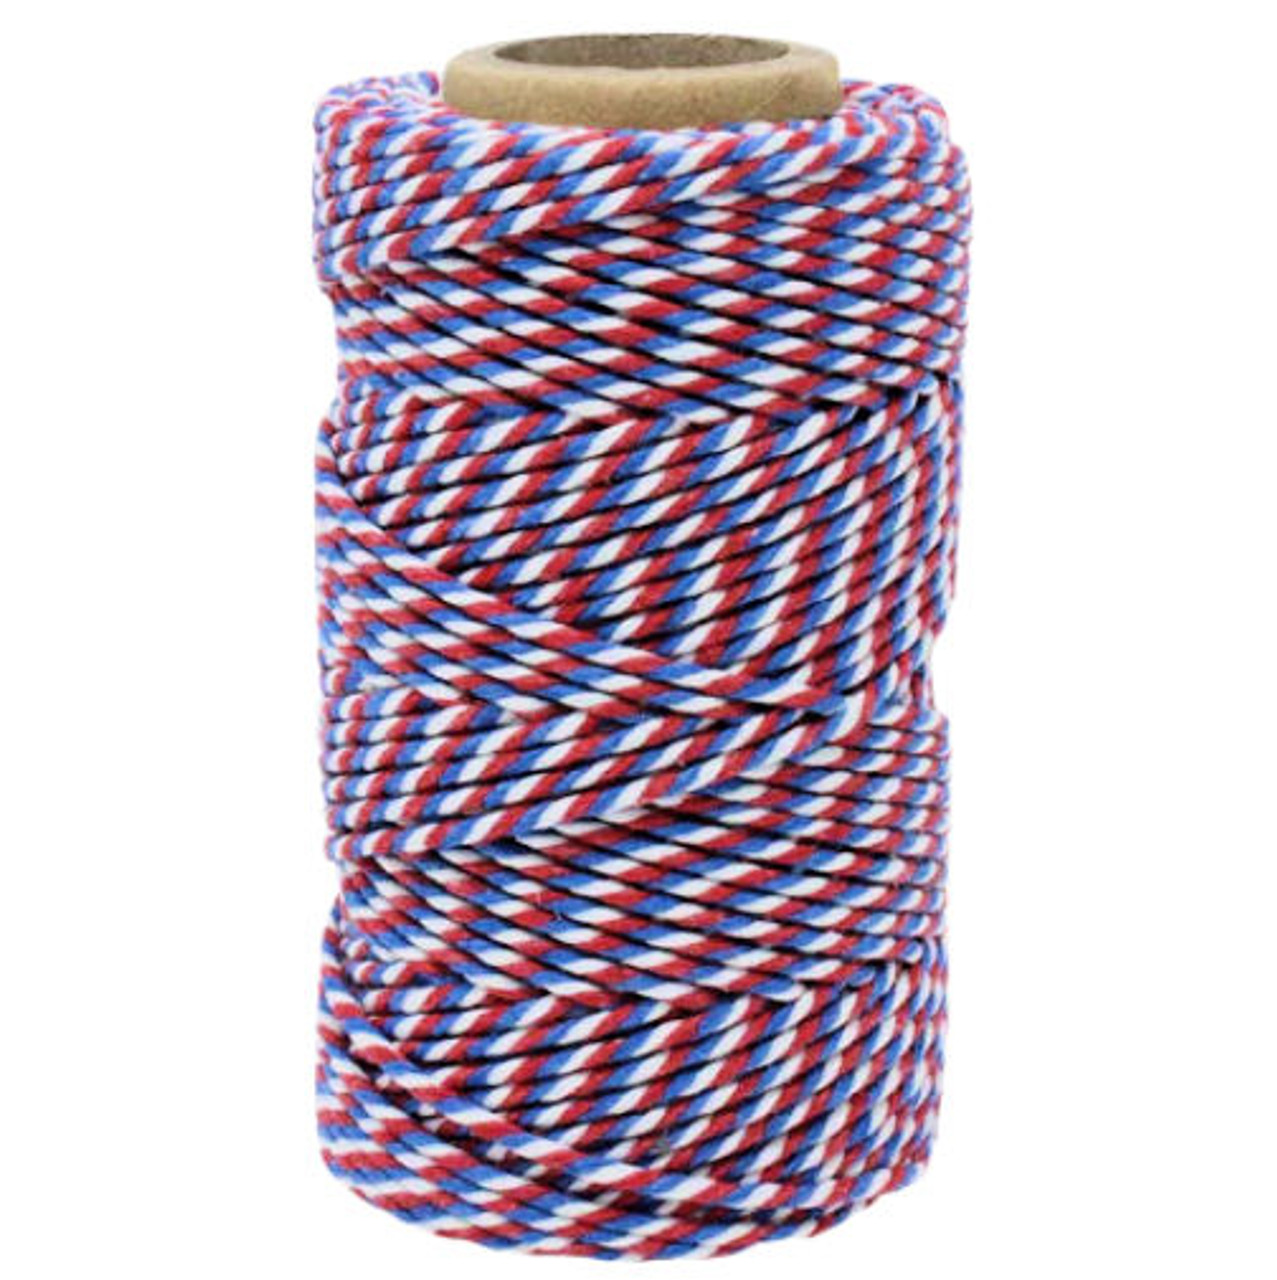 Reel x 100mt Red, White & Blue No.6 Cotton Bakers Twine